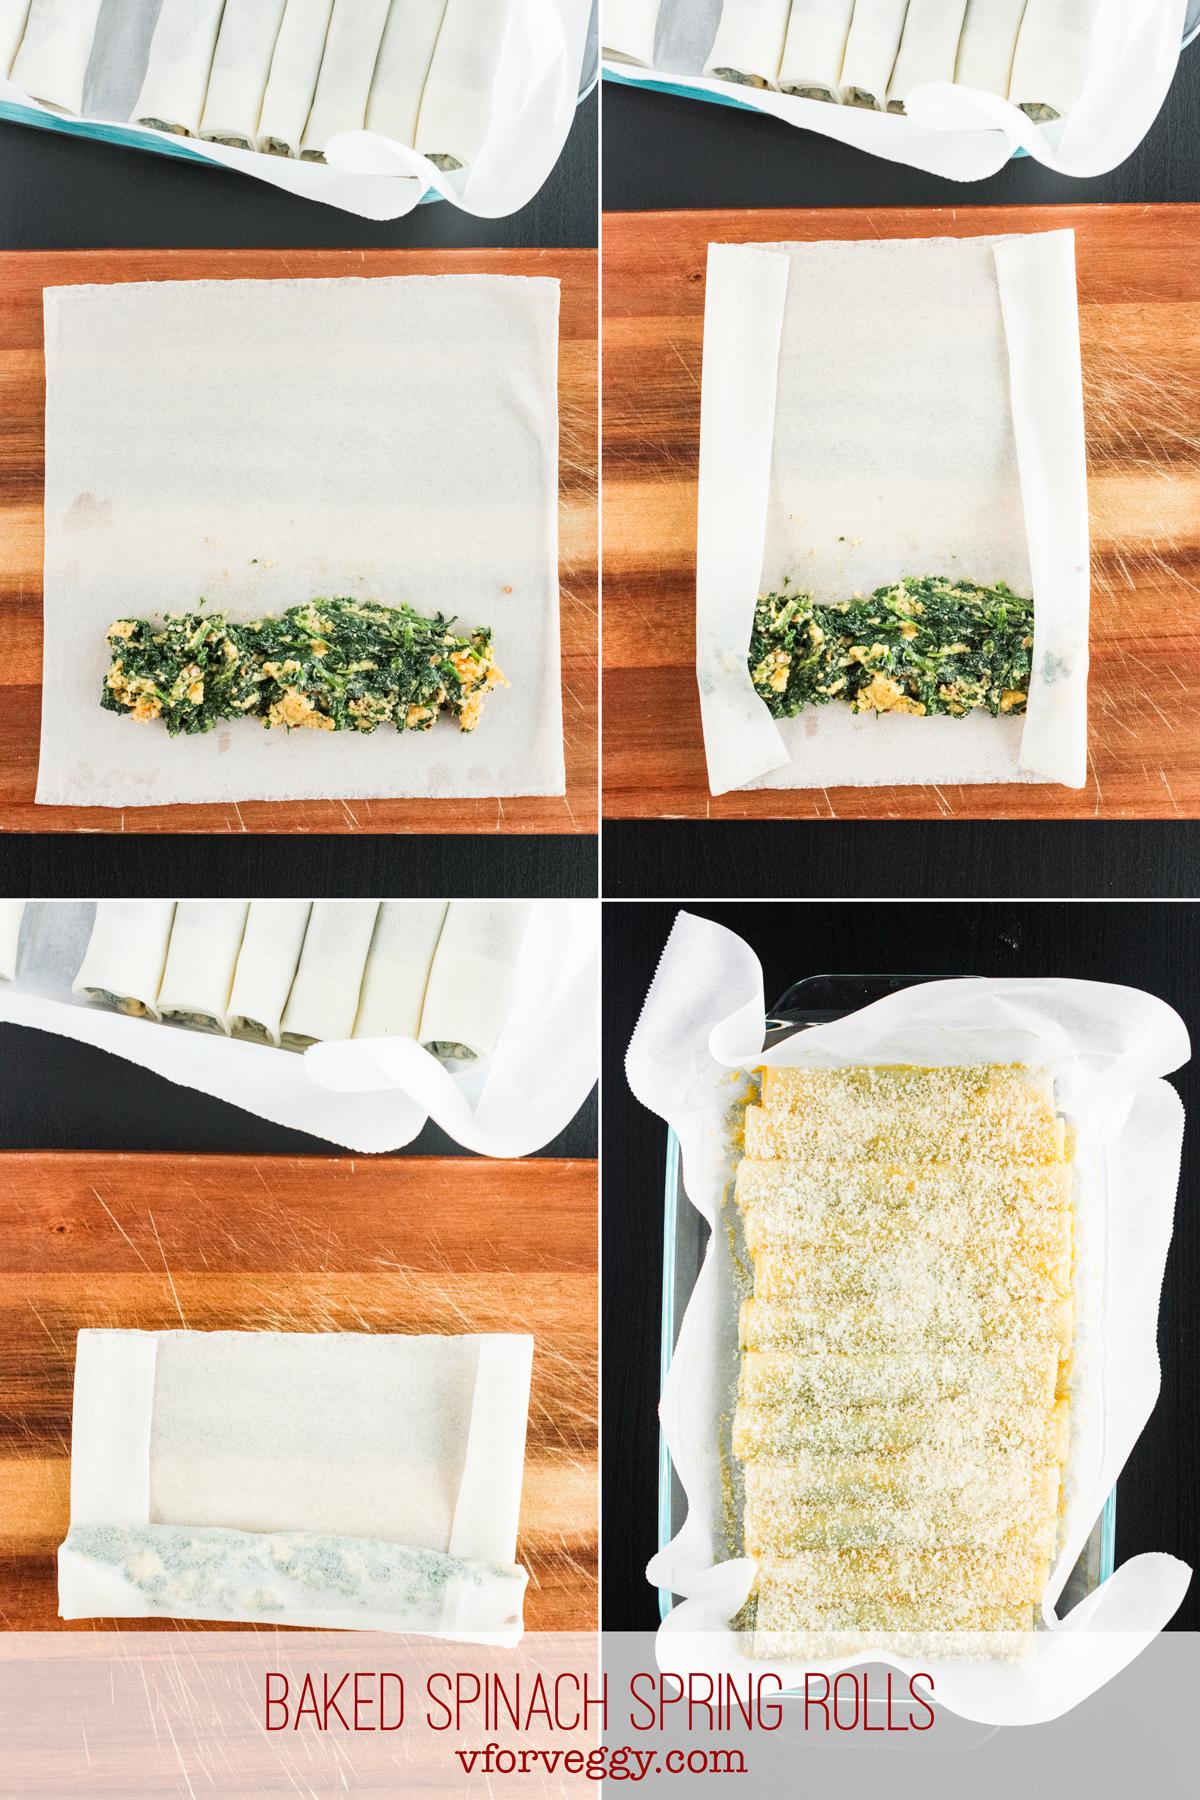 Shaping Spinach Spring Rolls (step-by-step)